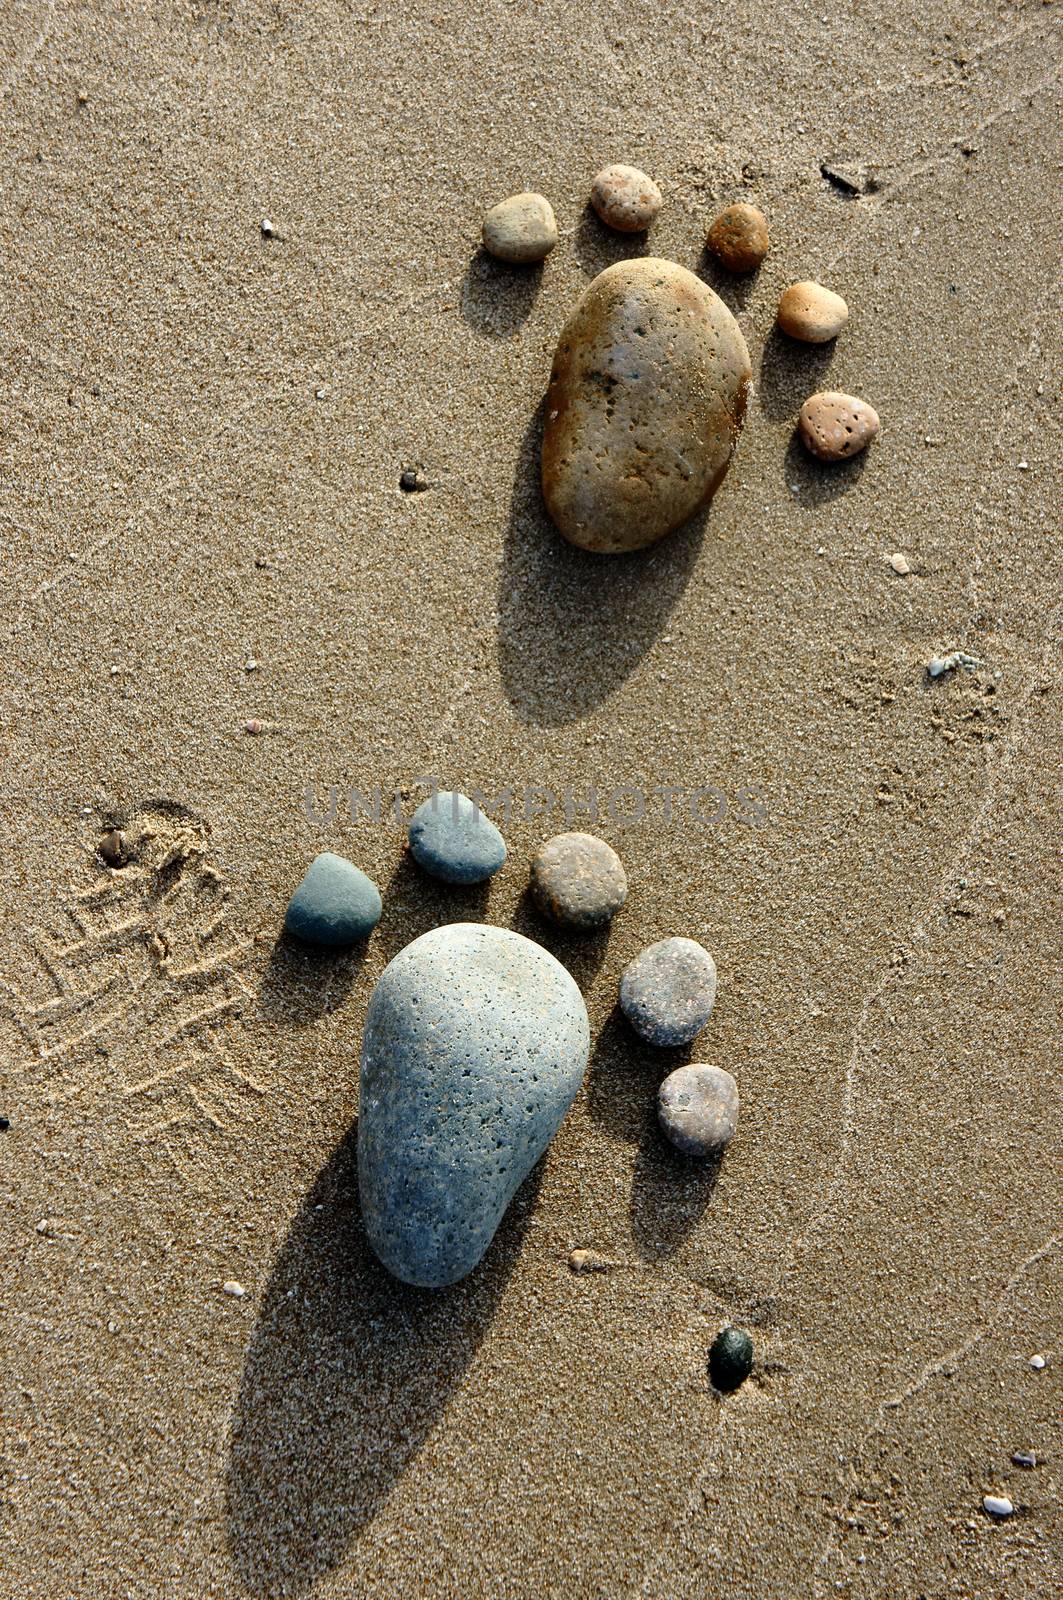 Group of foot by pebble on sand background, amazing concept from stone  with yellow color on beach, awesome art product